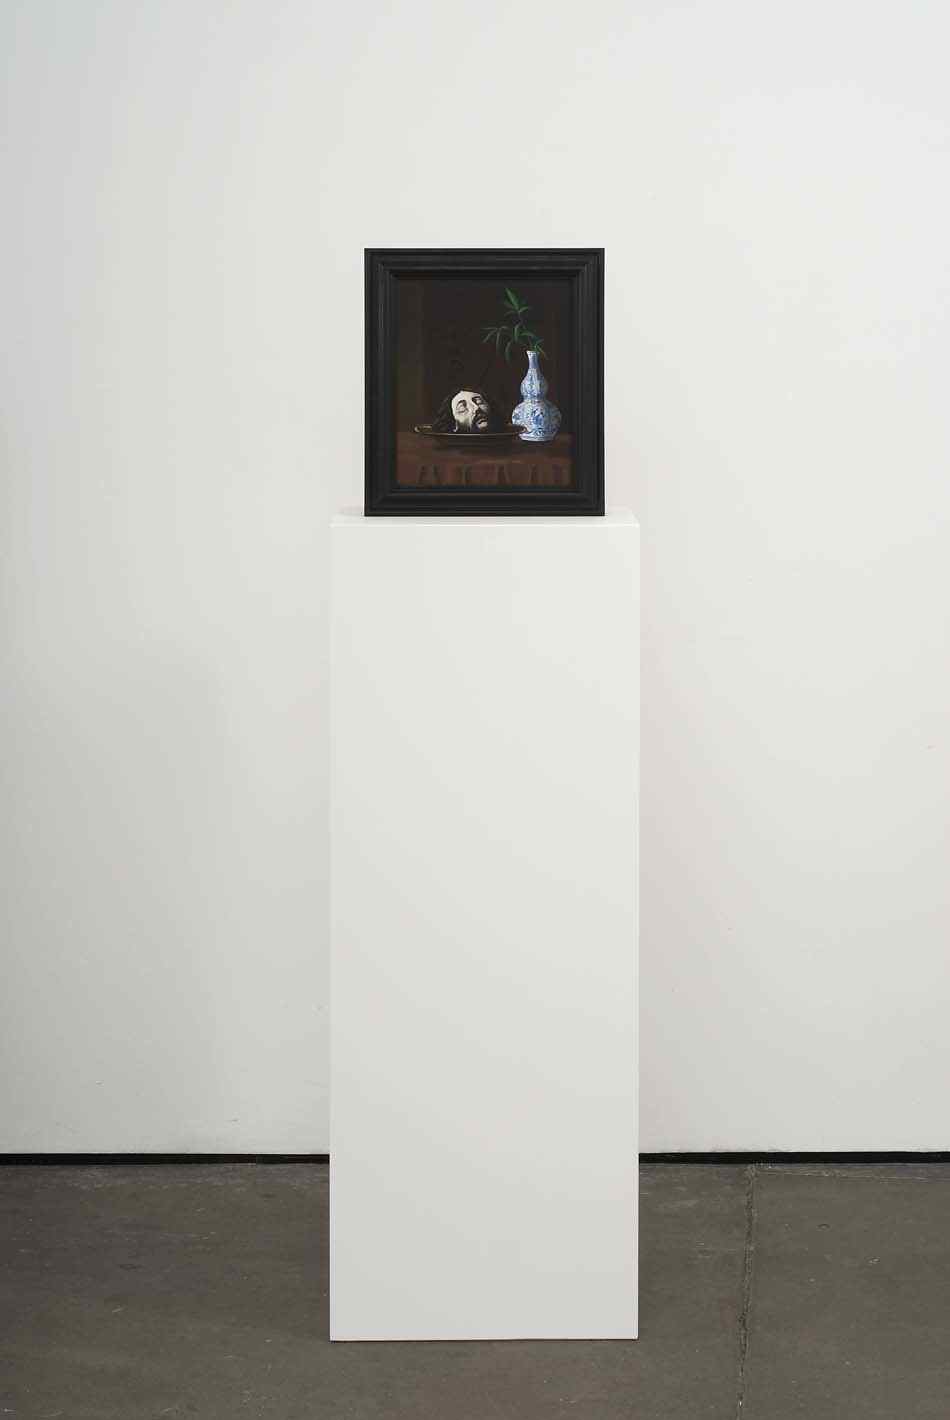     Paranoia 2009 Double-sided acrylic on board in artists frame mounted on pedestal 147.3 x 40 x 28cm    